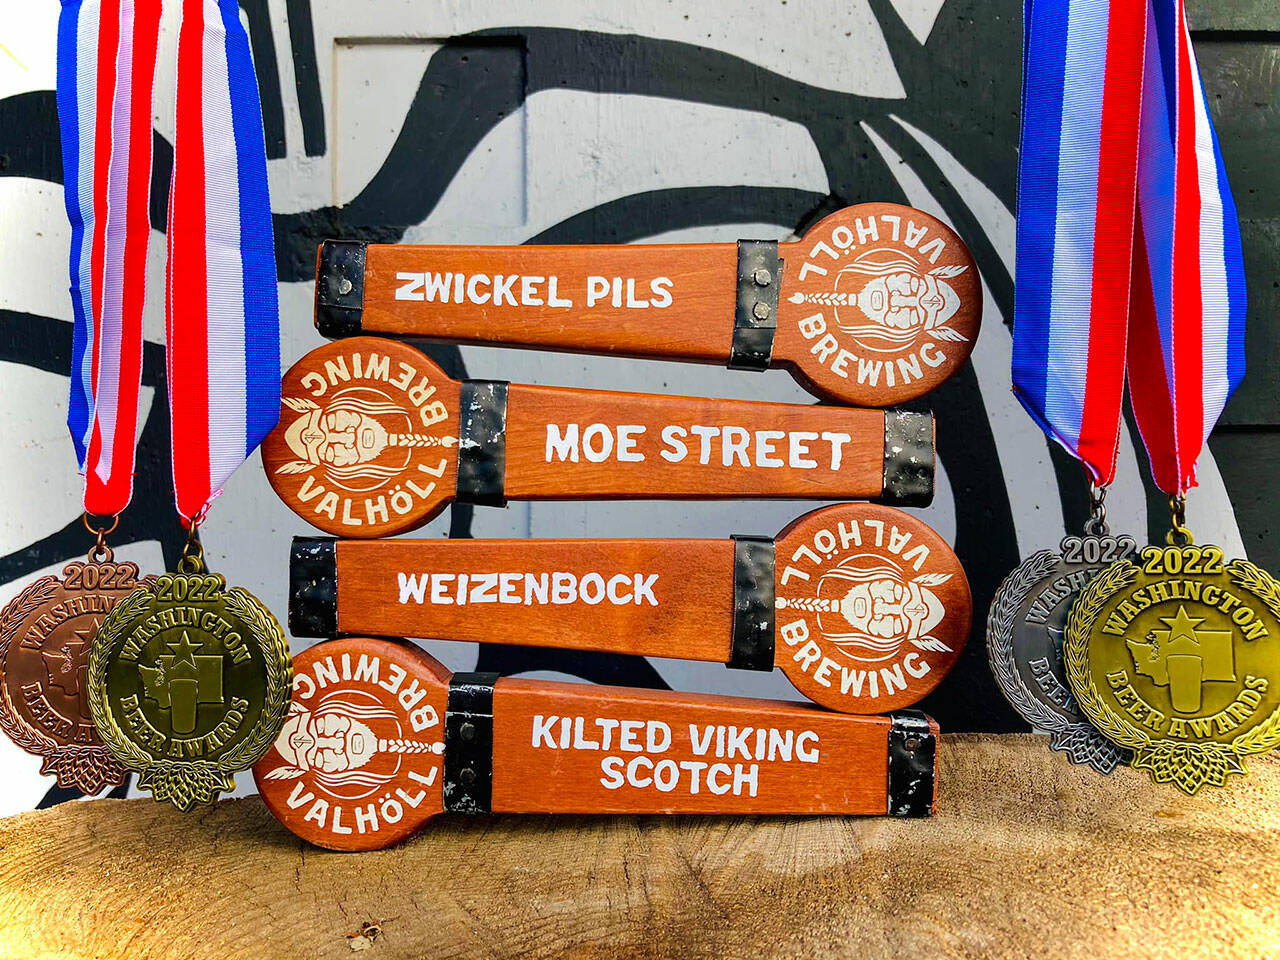 Valholl Brewing took home four medals at last year’s Washington Beer Awards. Valholl Brewing courtesy photos